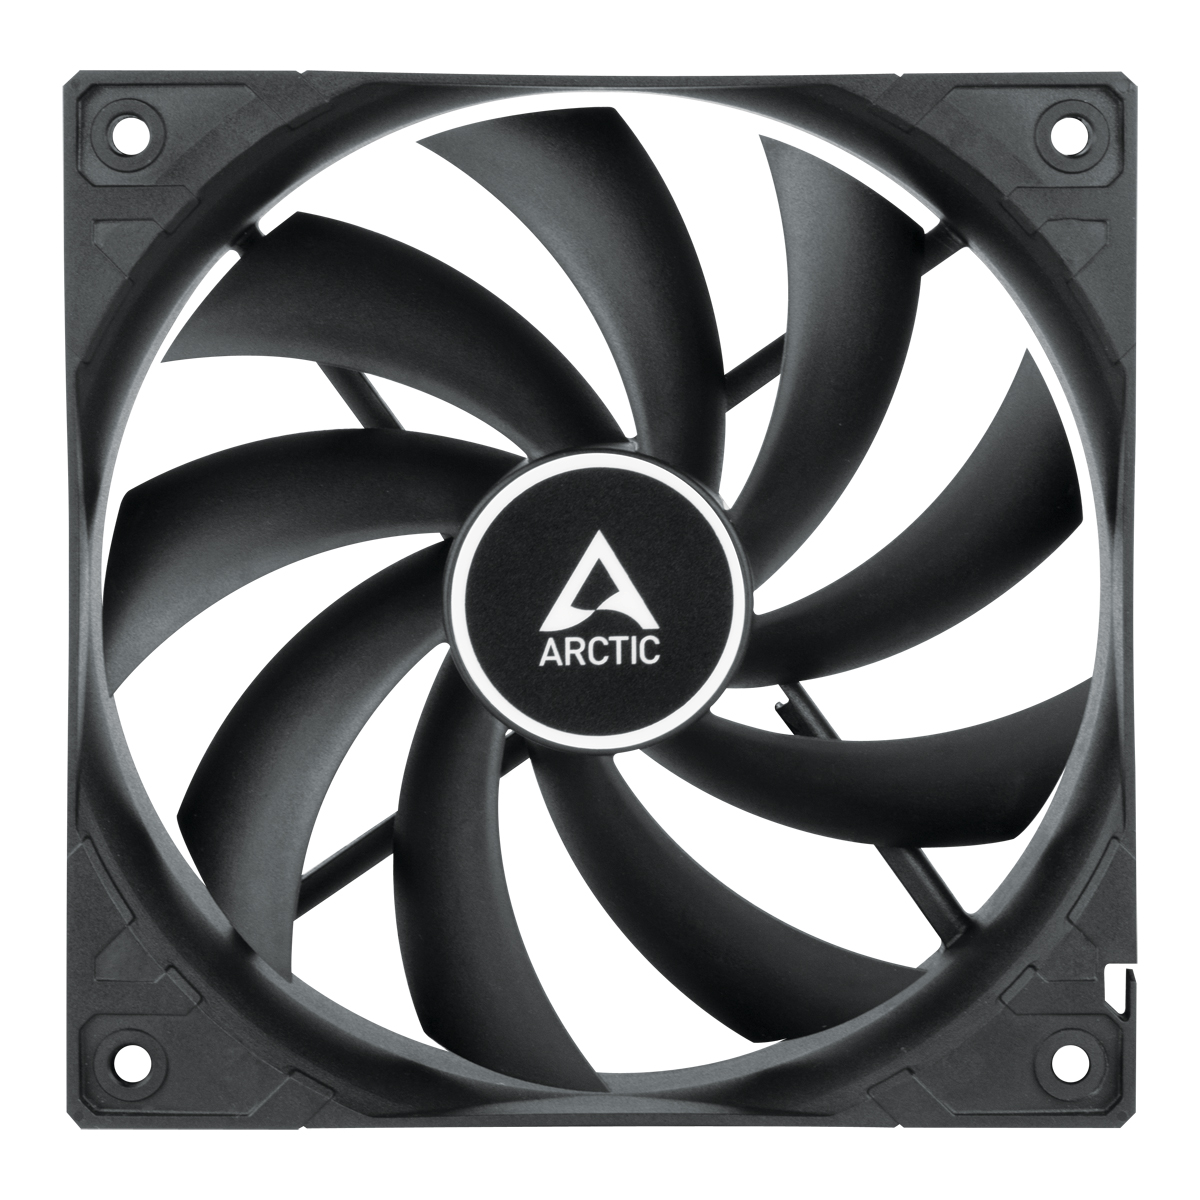 Arctic F12 PWM PST Case Fan - 120mm case fan with PWM control and PST cable - Arctic 2.35.64.00.070